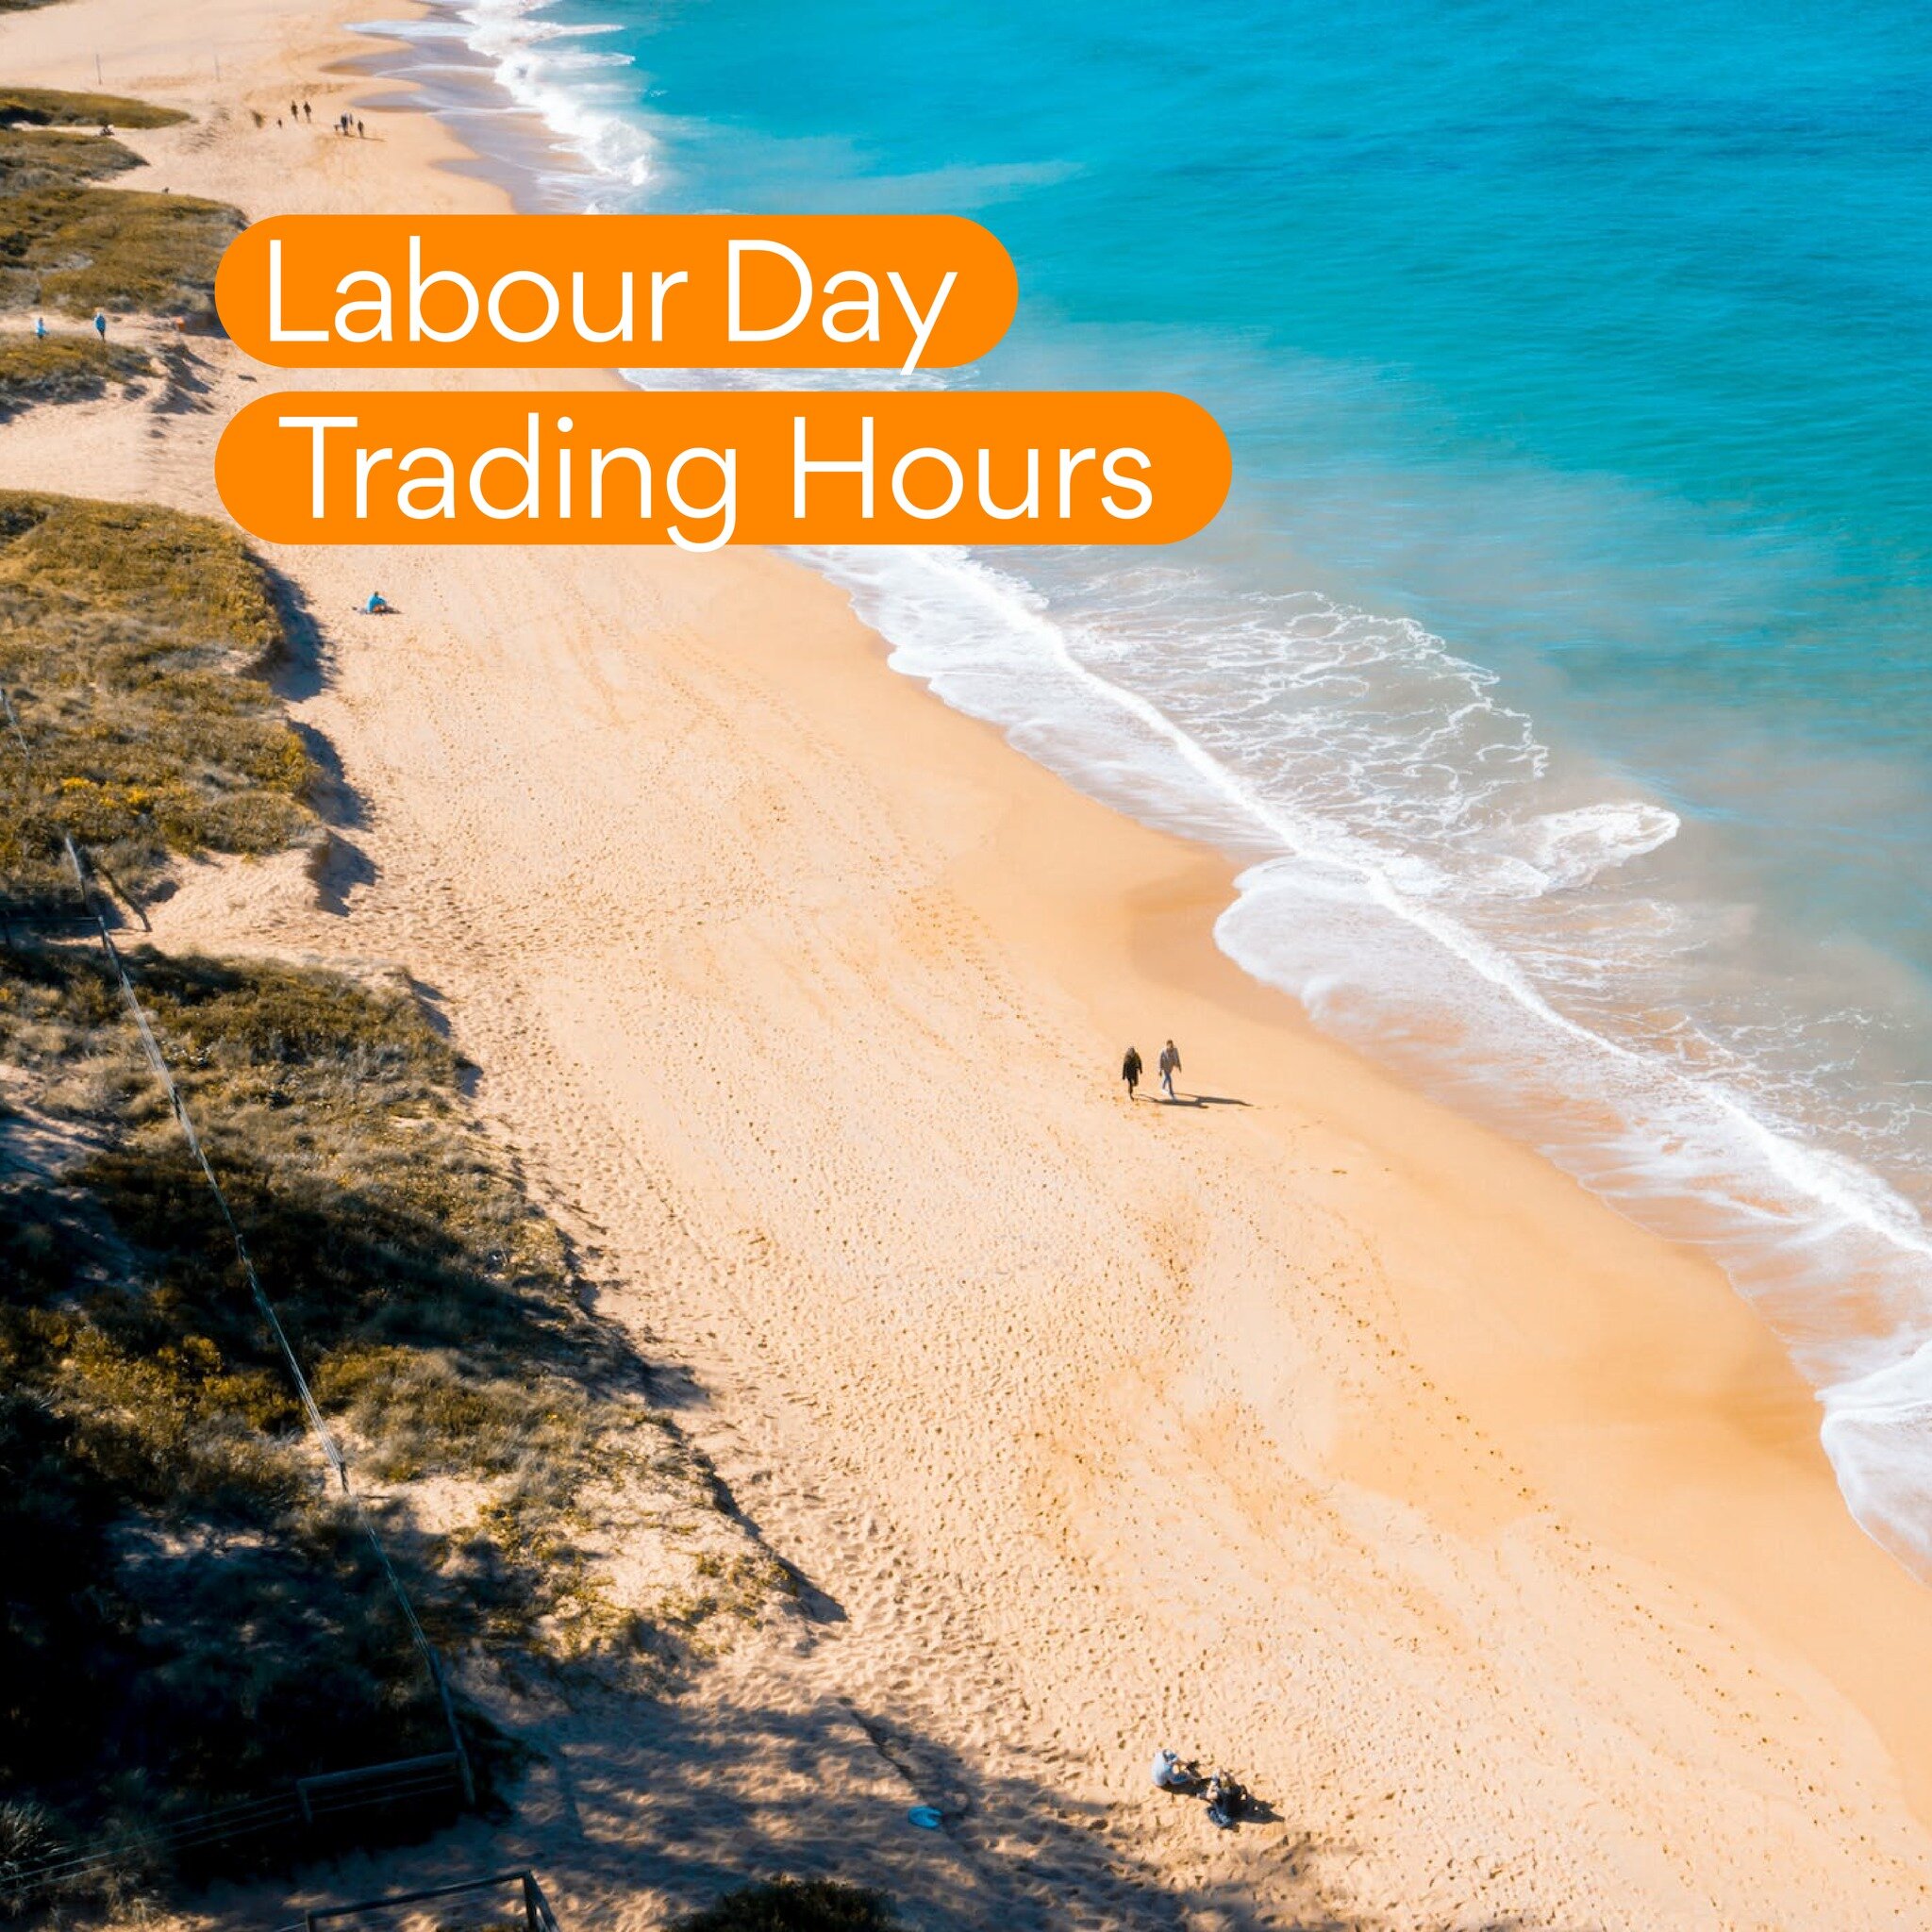 Yanchep Village will be open on the 4th of March.

Specialty stores trading hours may vary. Please check respective stores for public holiday trading hours.